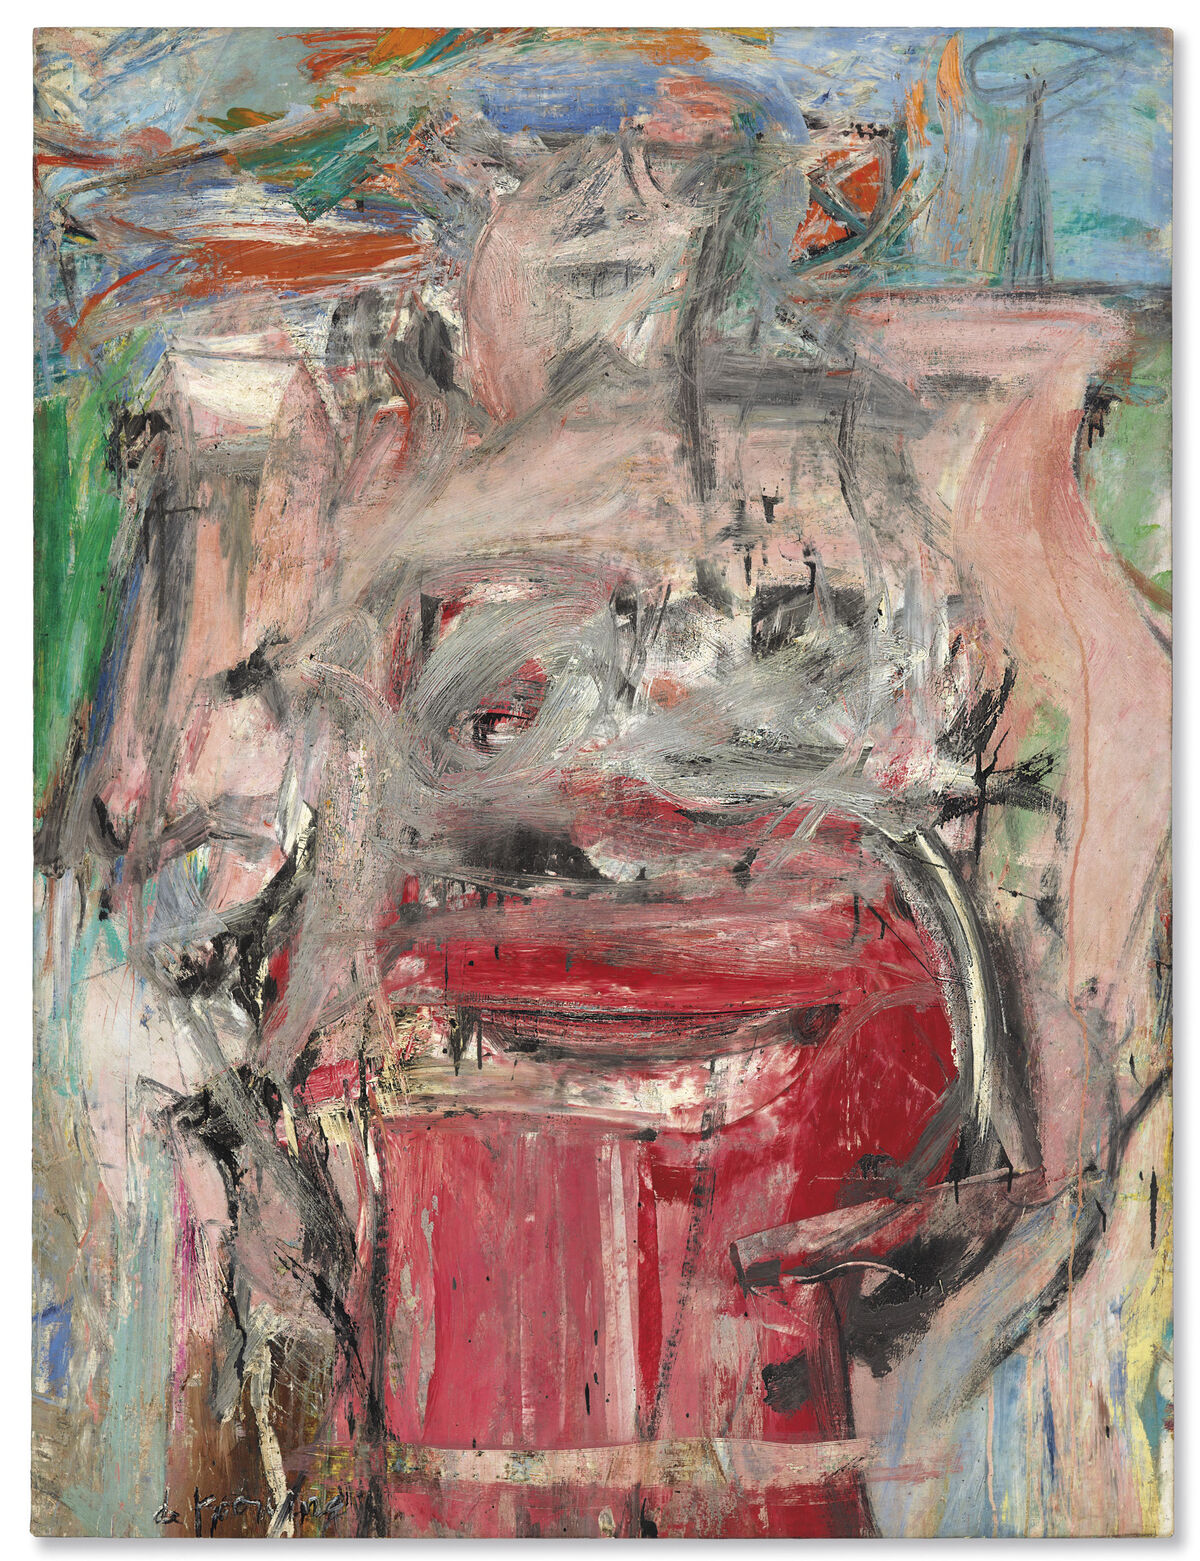 Willem de Kooning, Woman as Landscape, circa 1954-55. Courtesy of Christie’s.